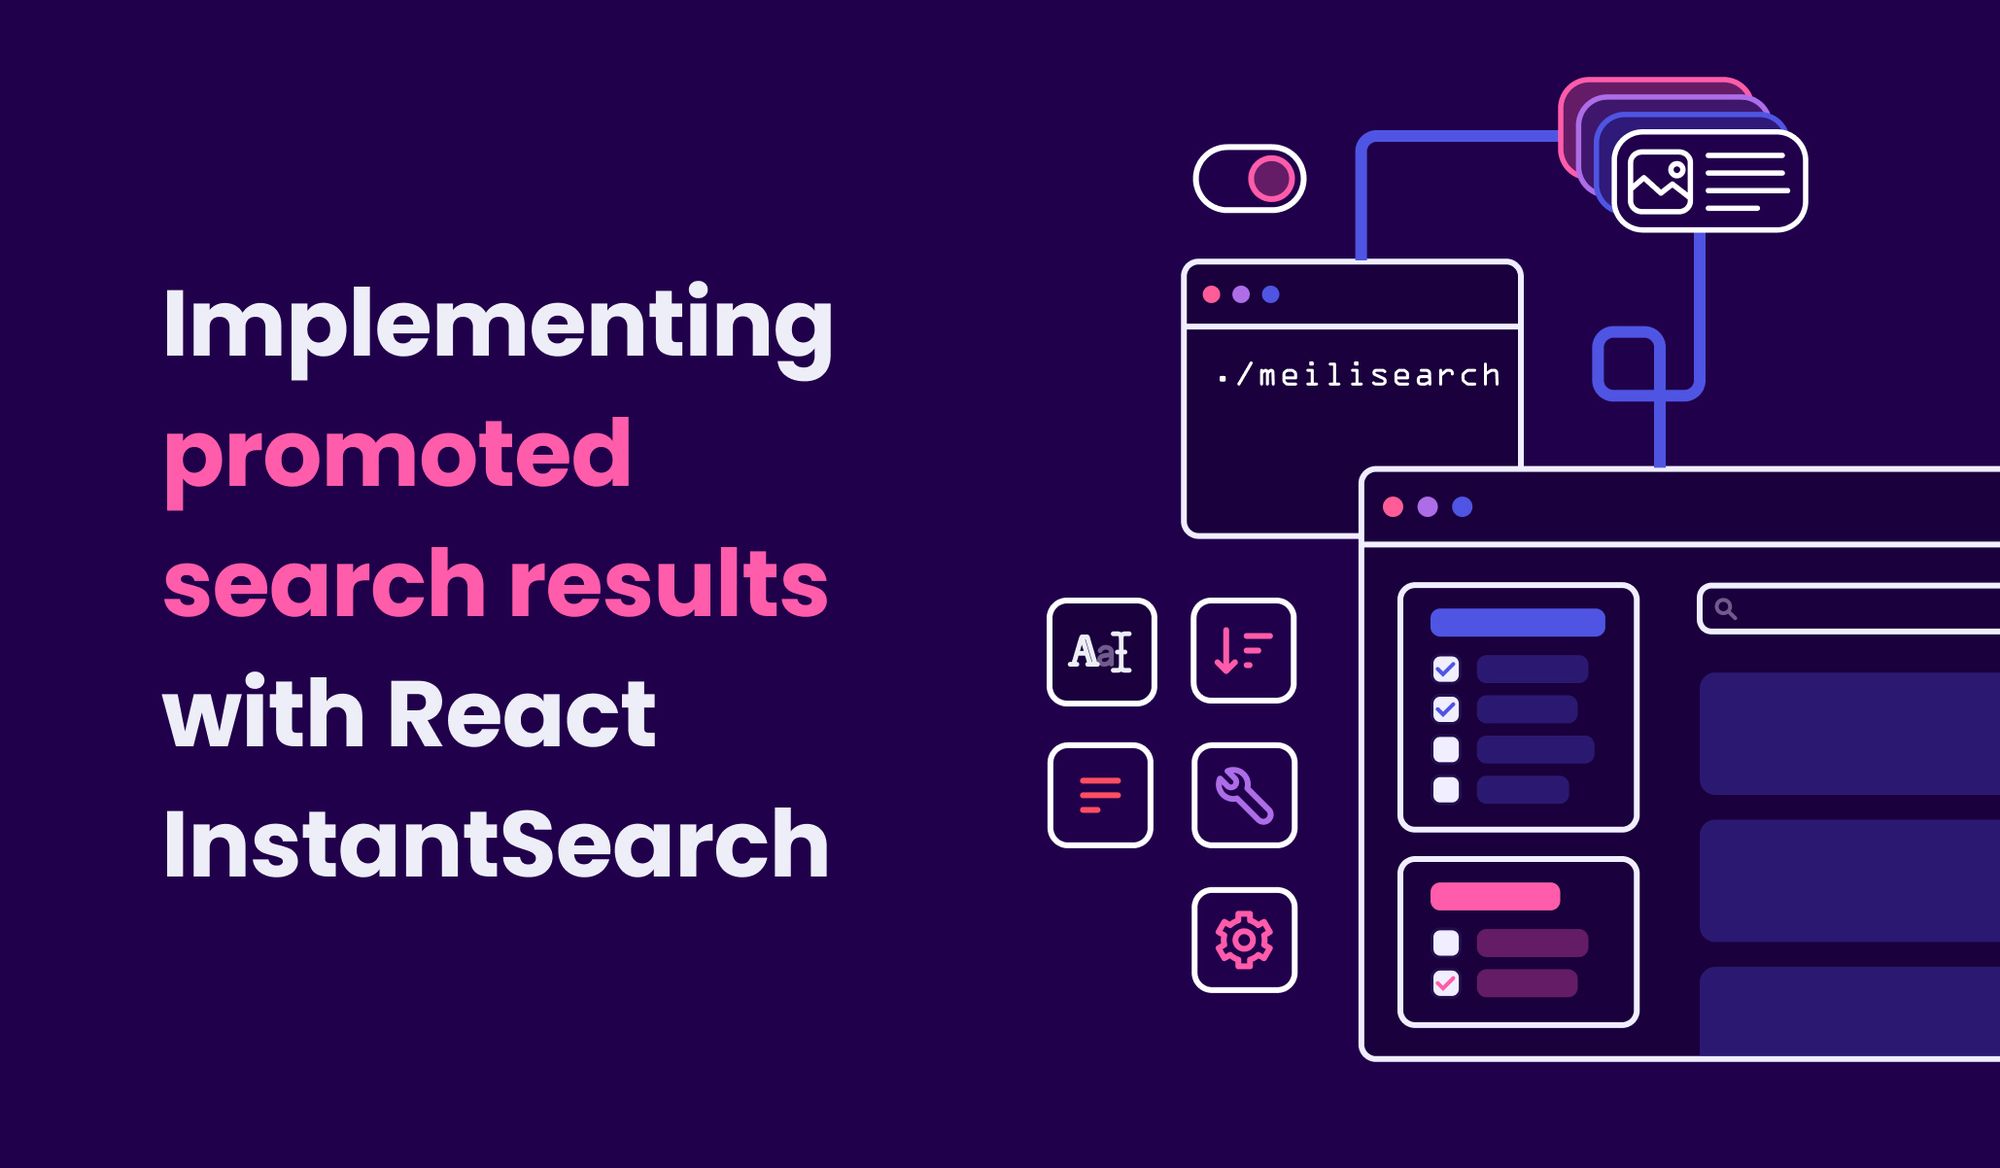 Implementing promoted search results with React InstantSearch